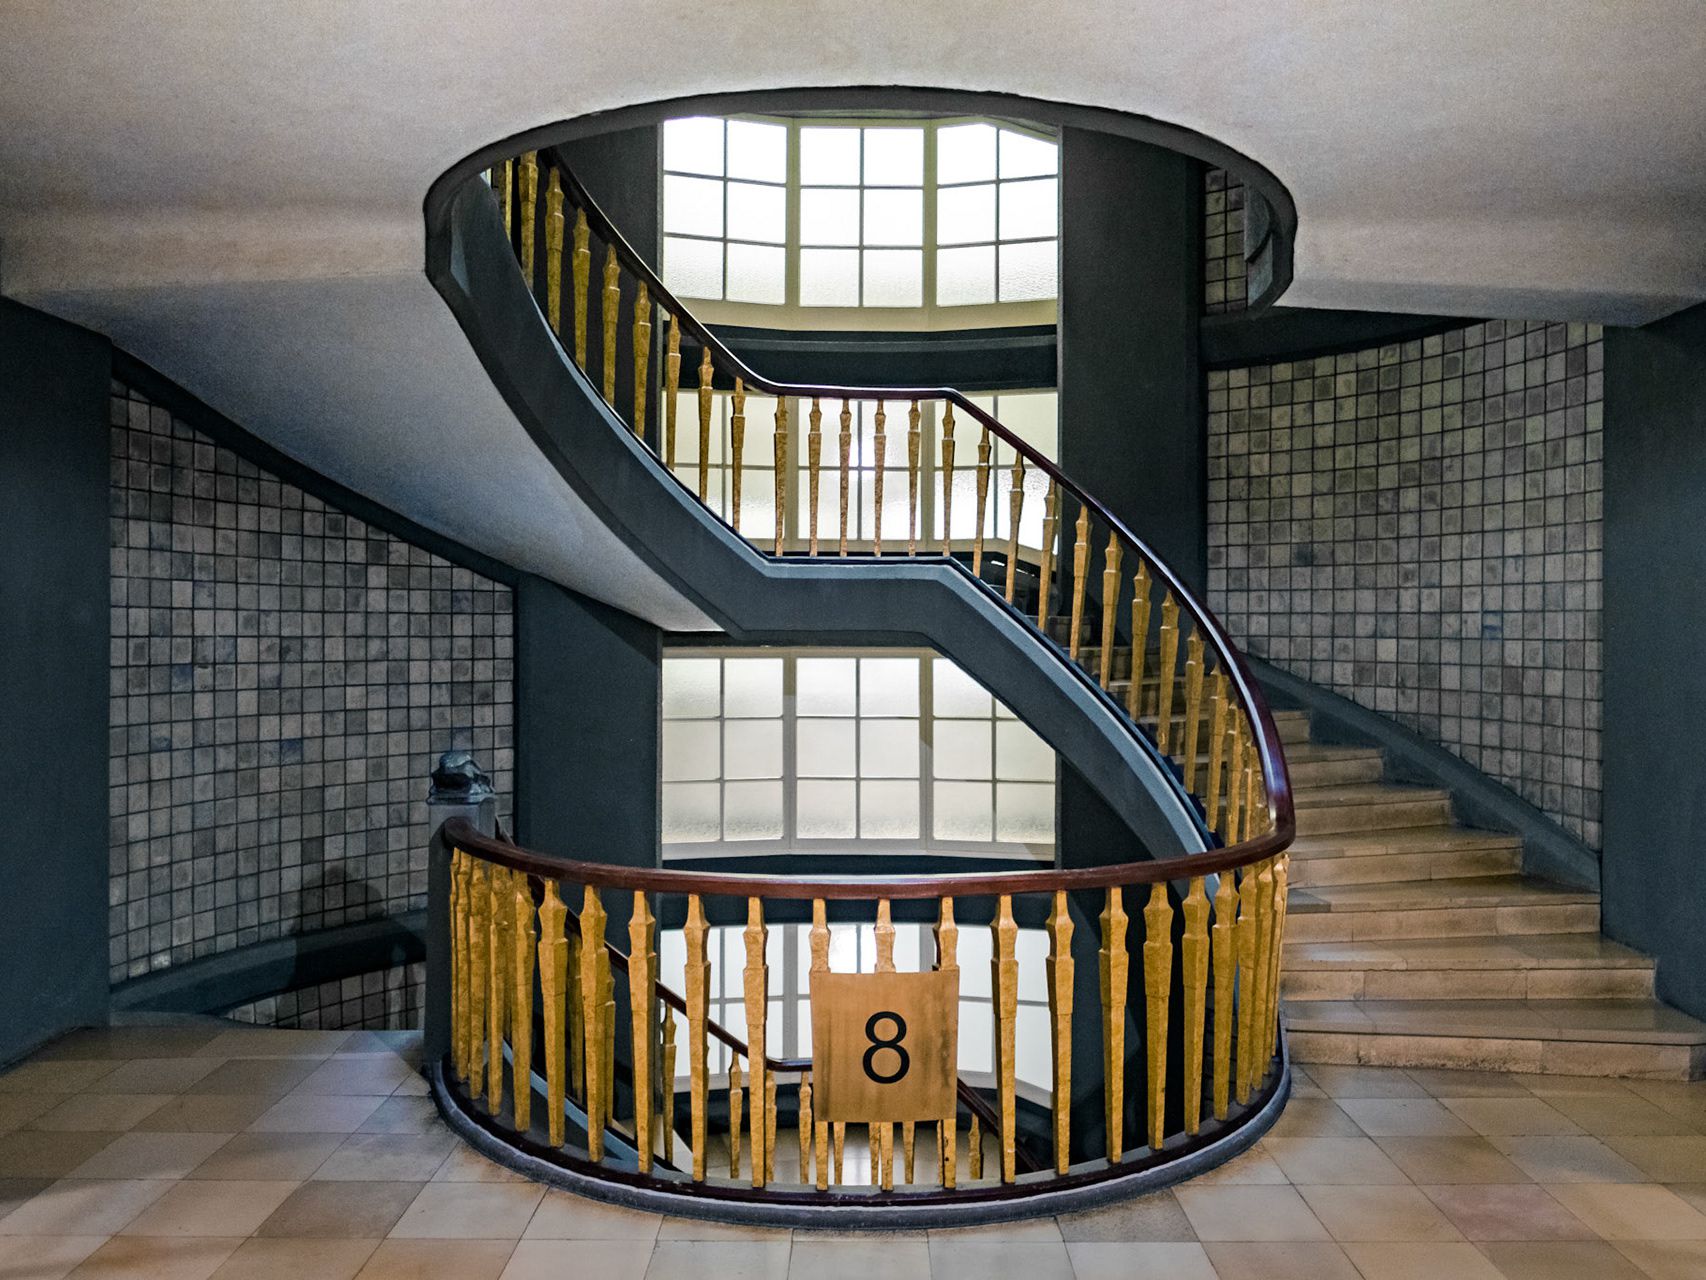 Hamburg - 8 staircases and 150 years of history